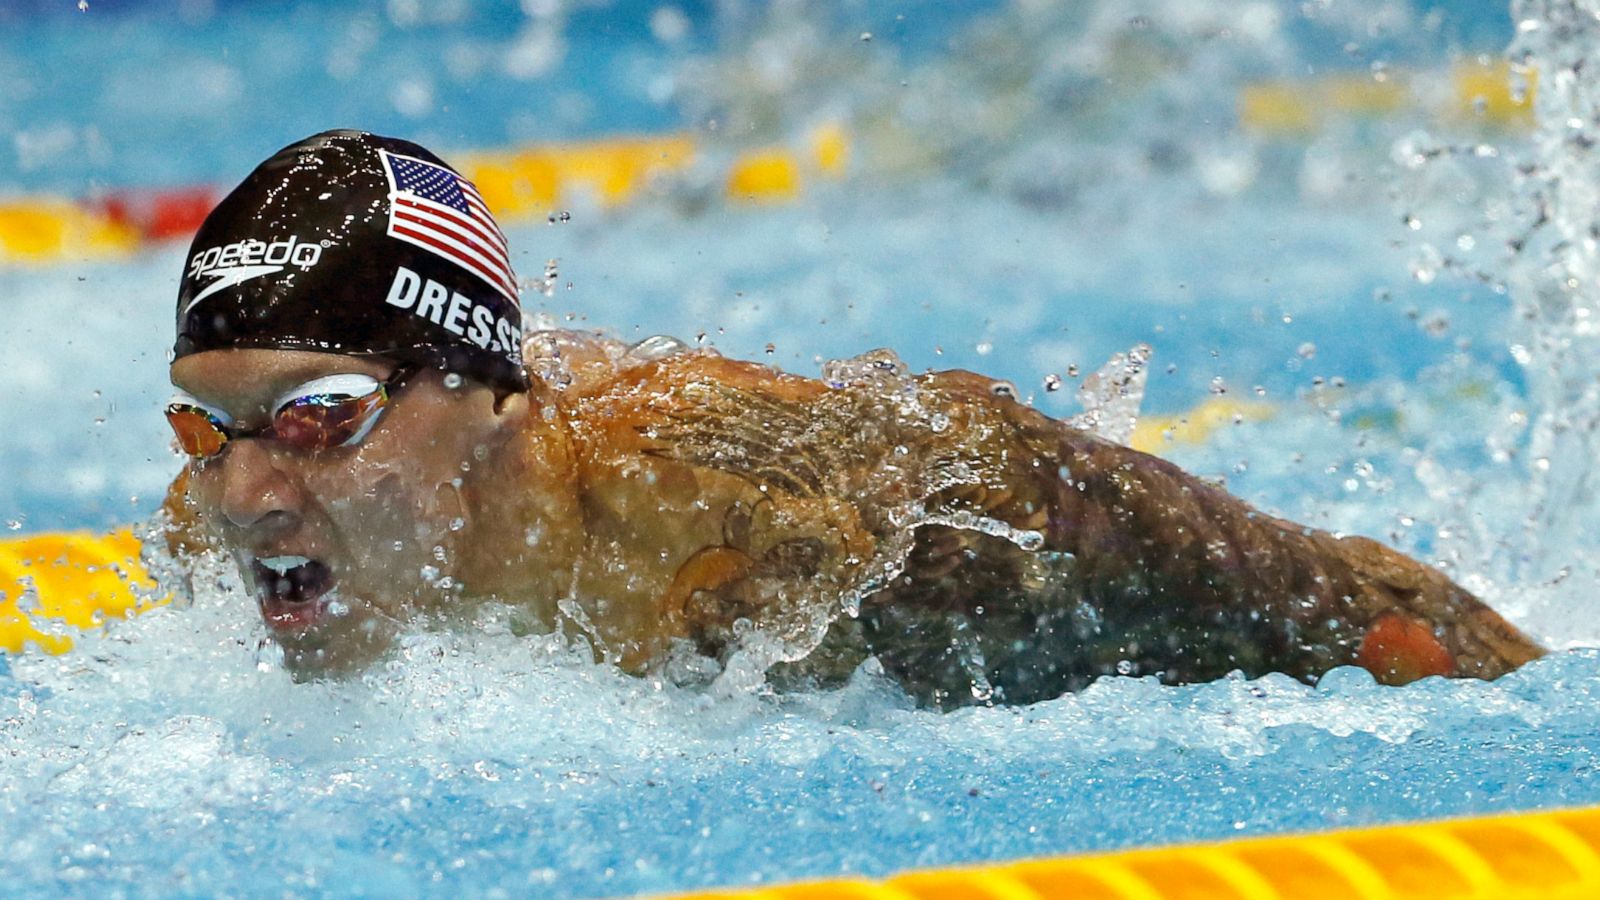 AP Interview: Dressel a reluctant superstar heading to 2020